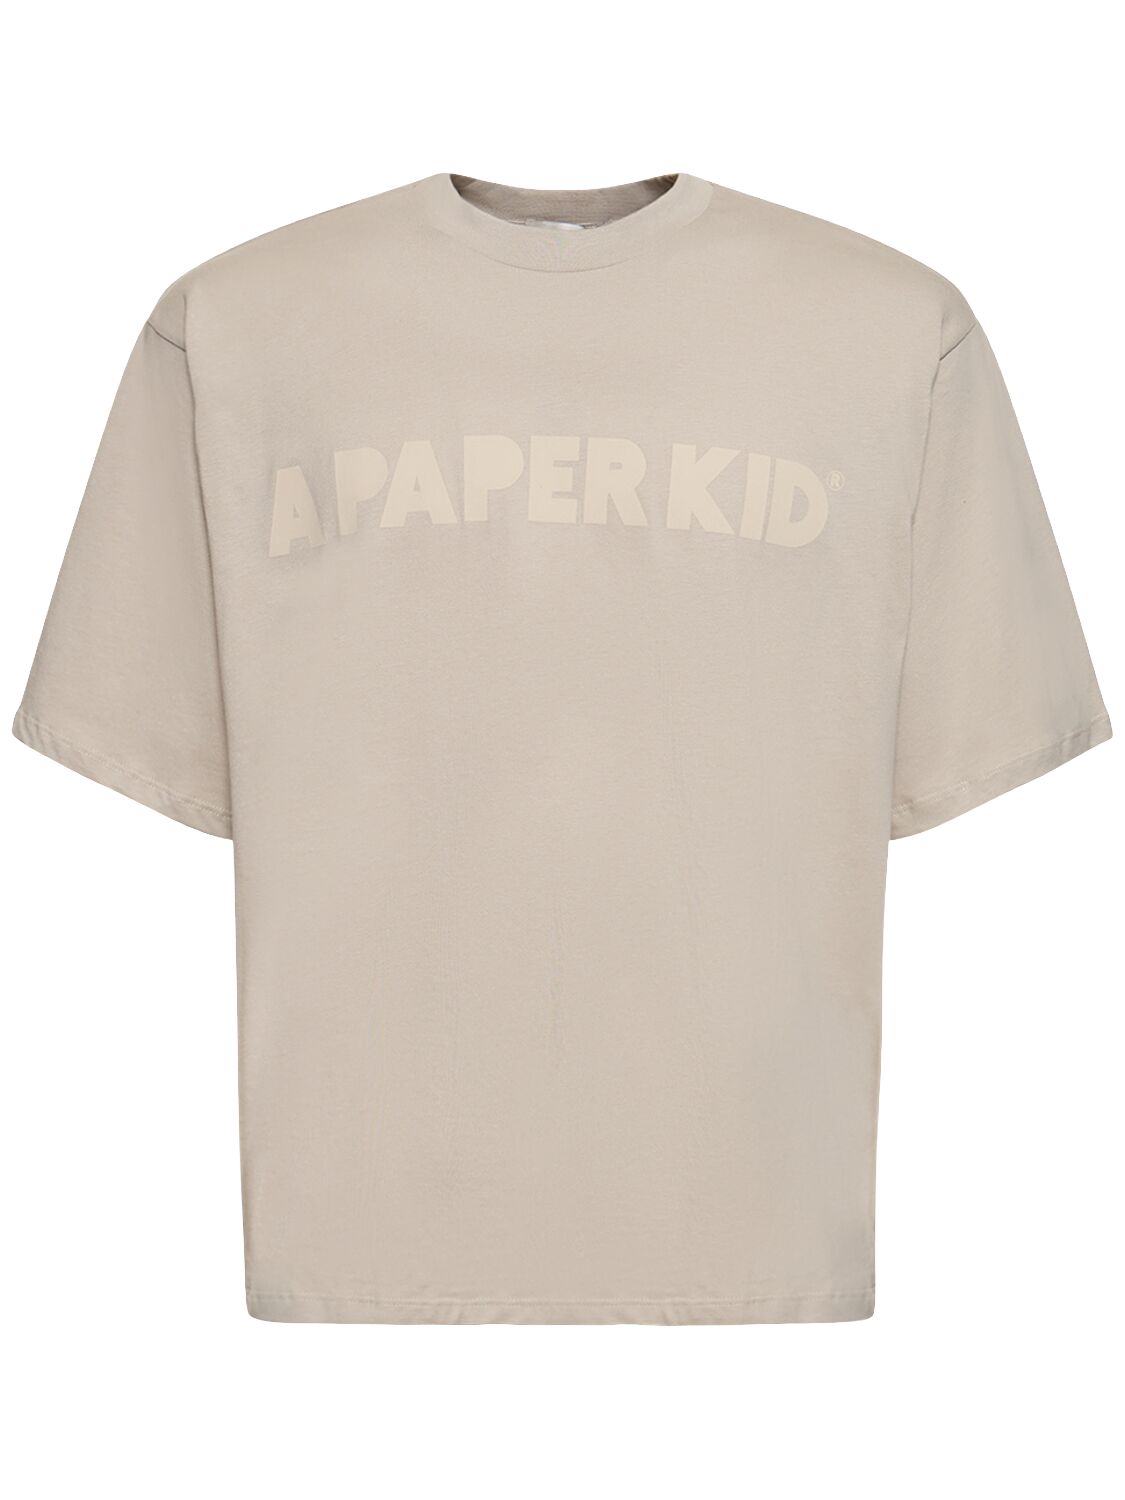 A Paper Kid Unisex T-shirt In Grey